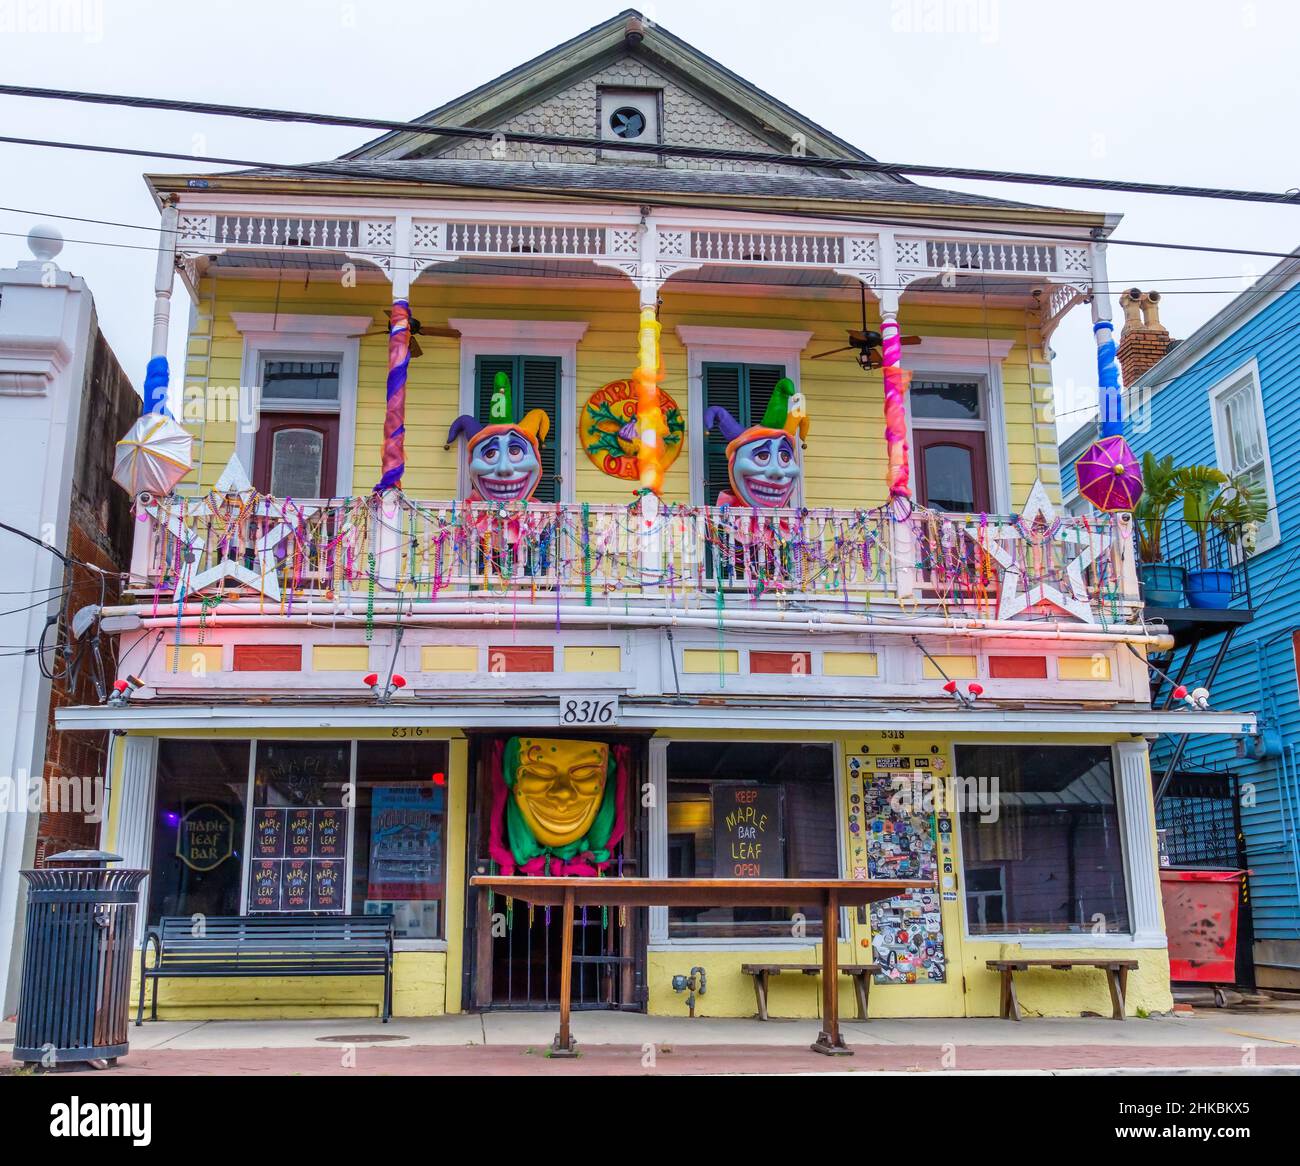 NEW ORLEANS, LA, USA - FEBRUARY 8, 2021: Full Front view of world famous Maple Leaf Bar de with Mardi Gras decorations Stock Photo